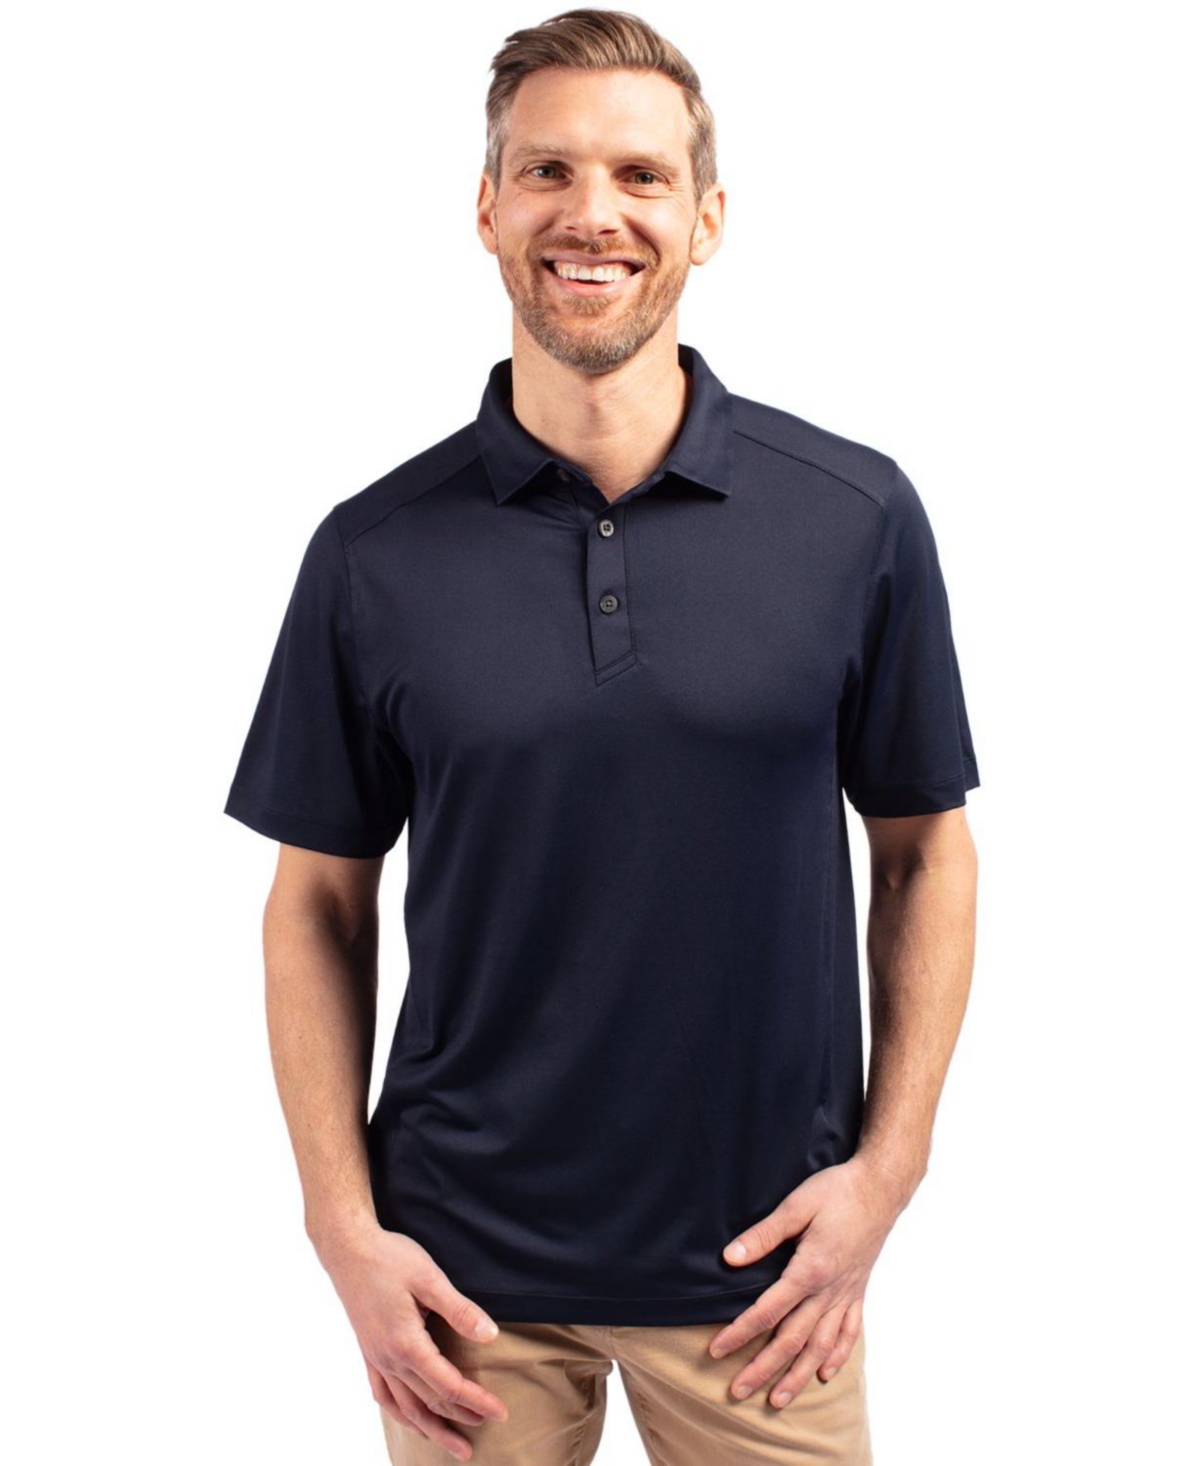 Men's Forge Eco Stretch Recycled Polo Shirt - Navy blue